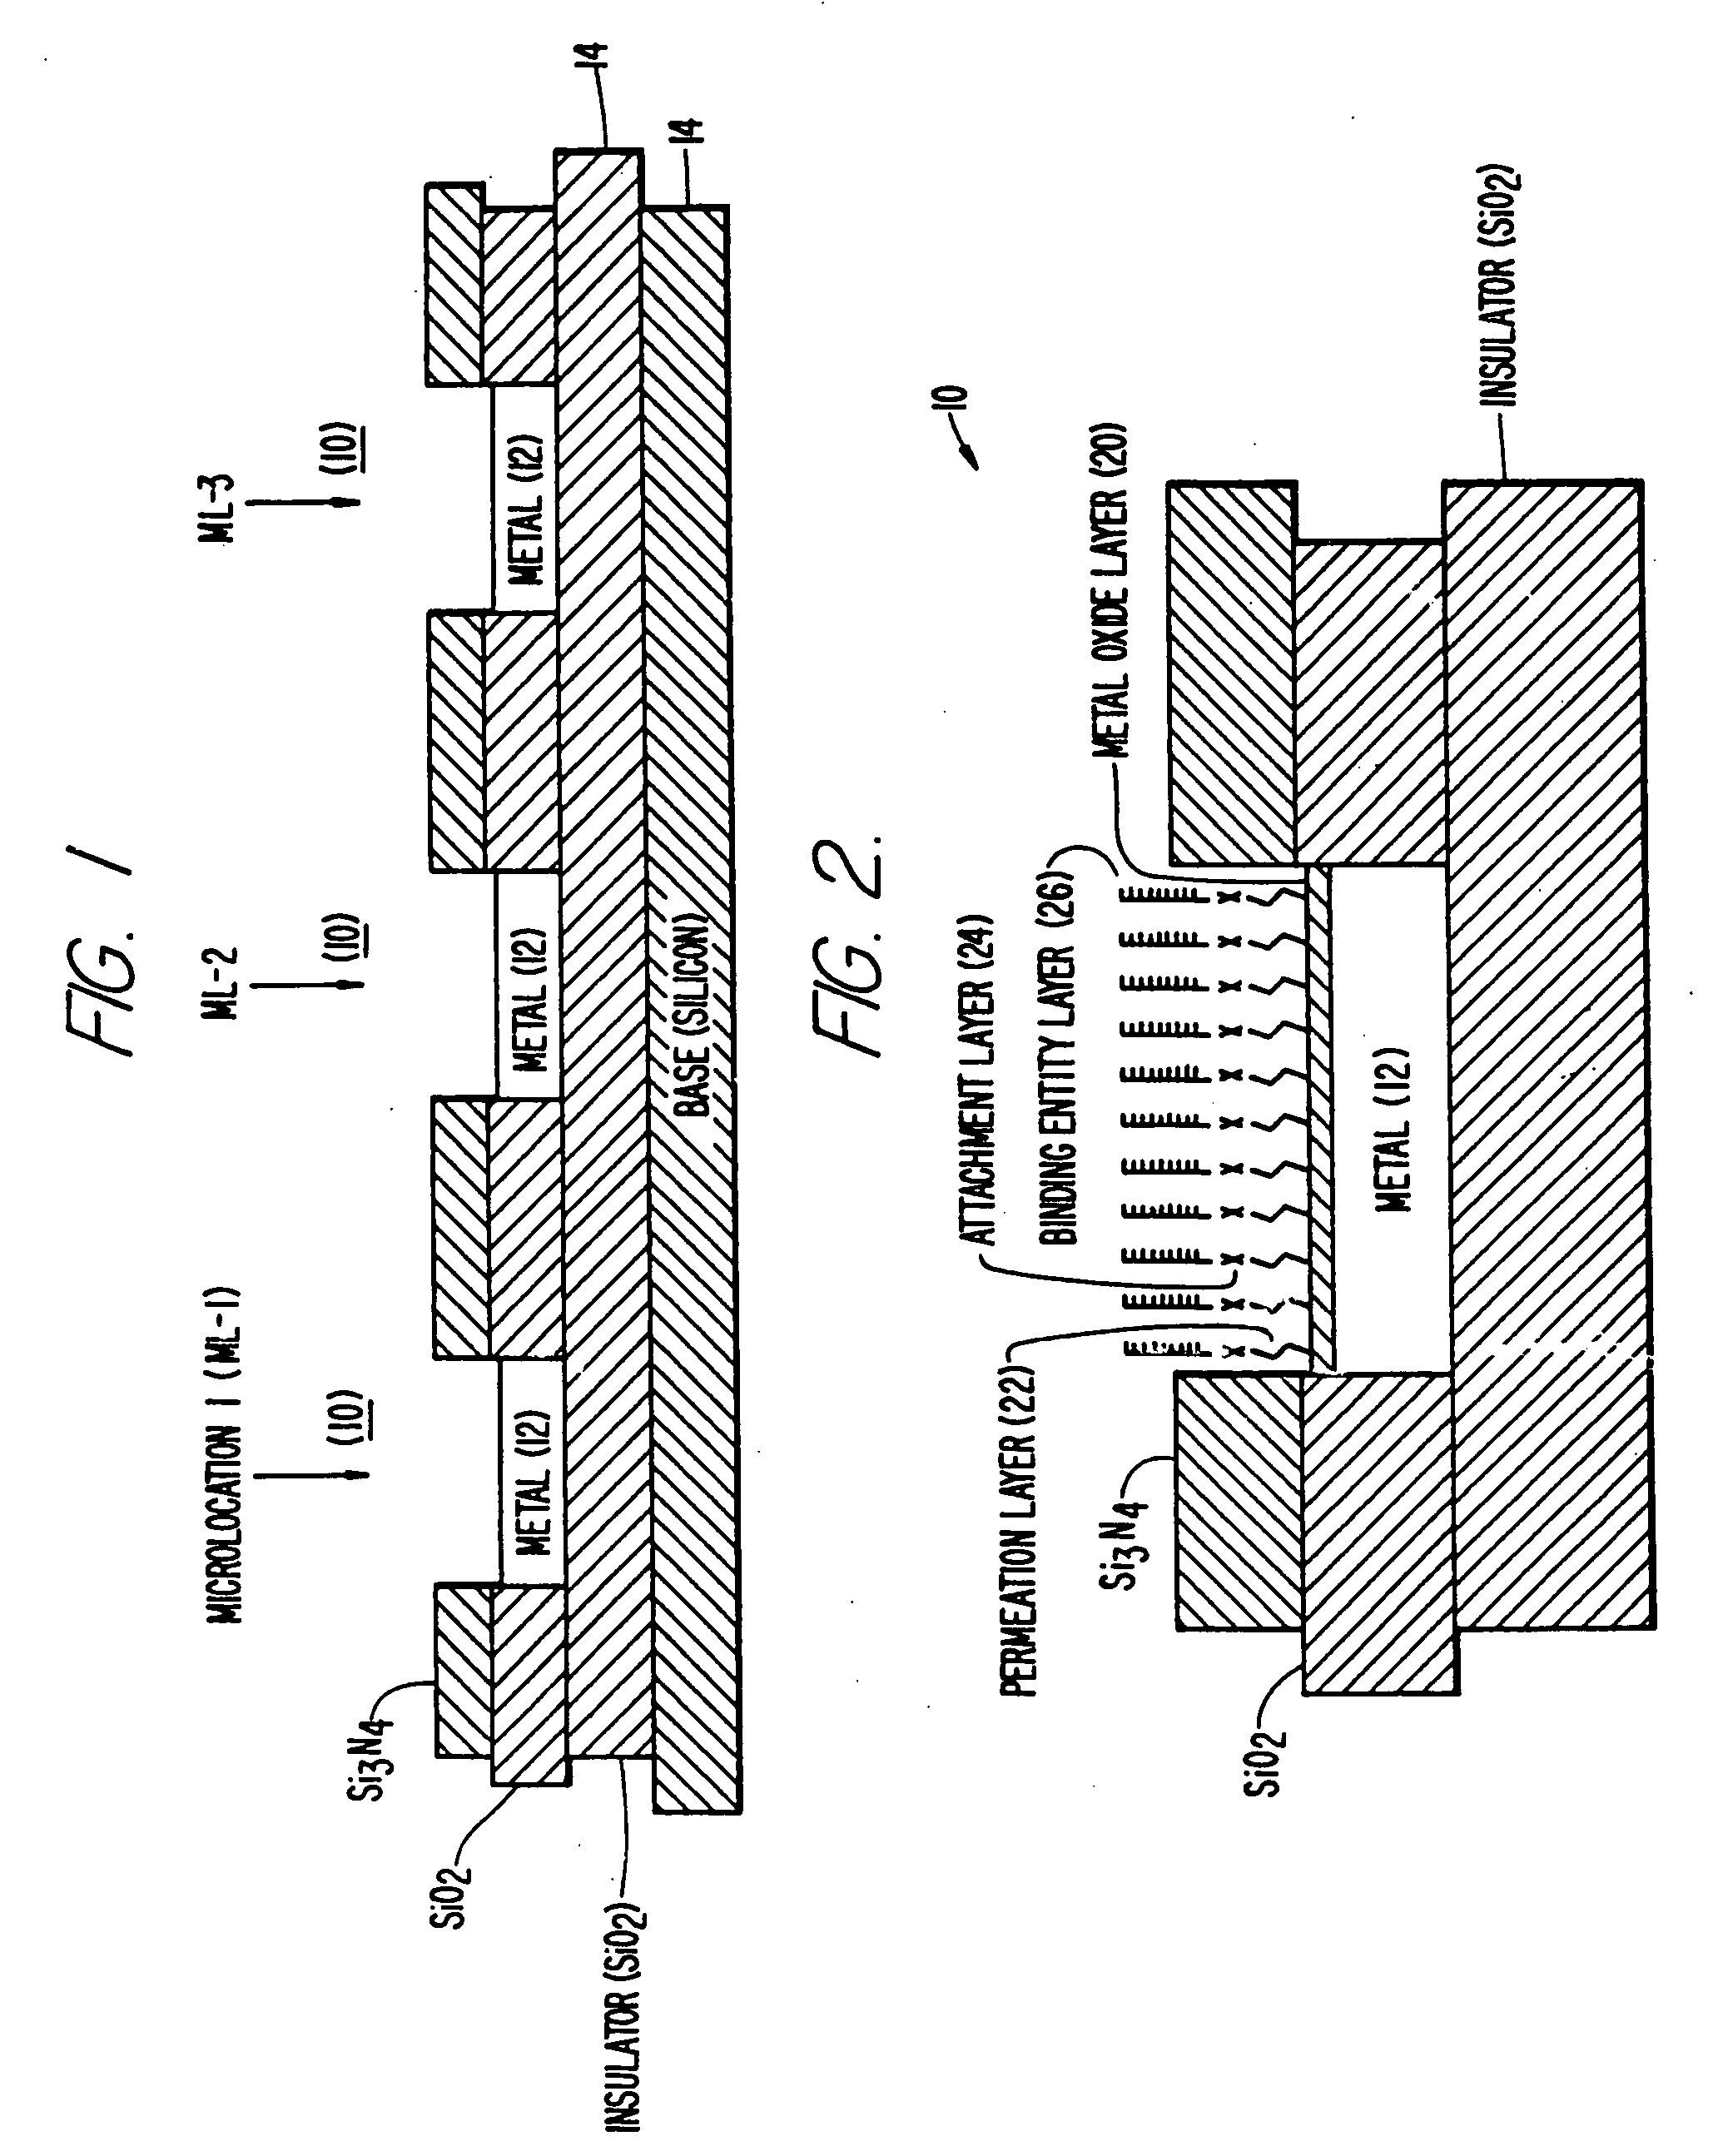 Self-addressable self-assembling microelectronic integrated systems, component devices, mechanisms, methods, and procedures for molecular biological analysis and diagnostics